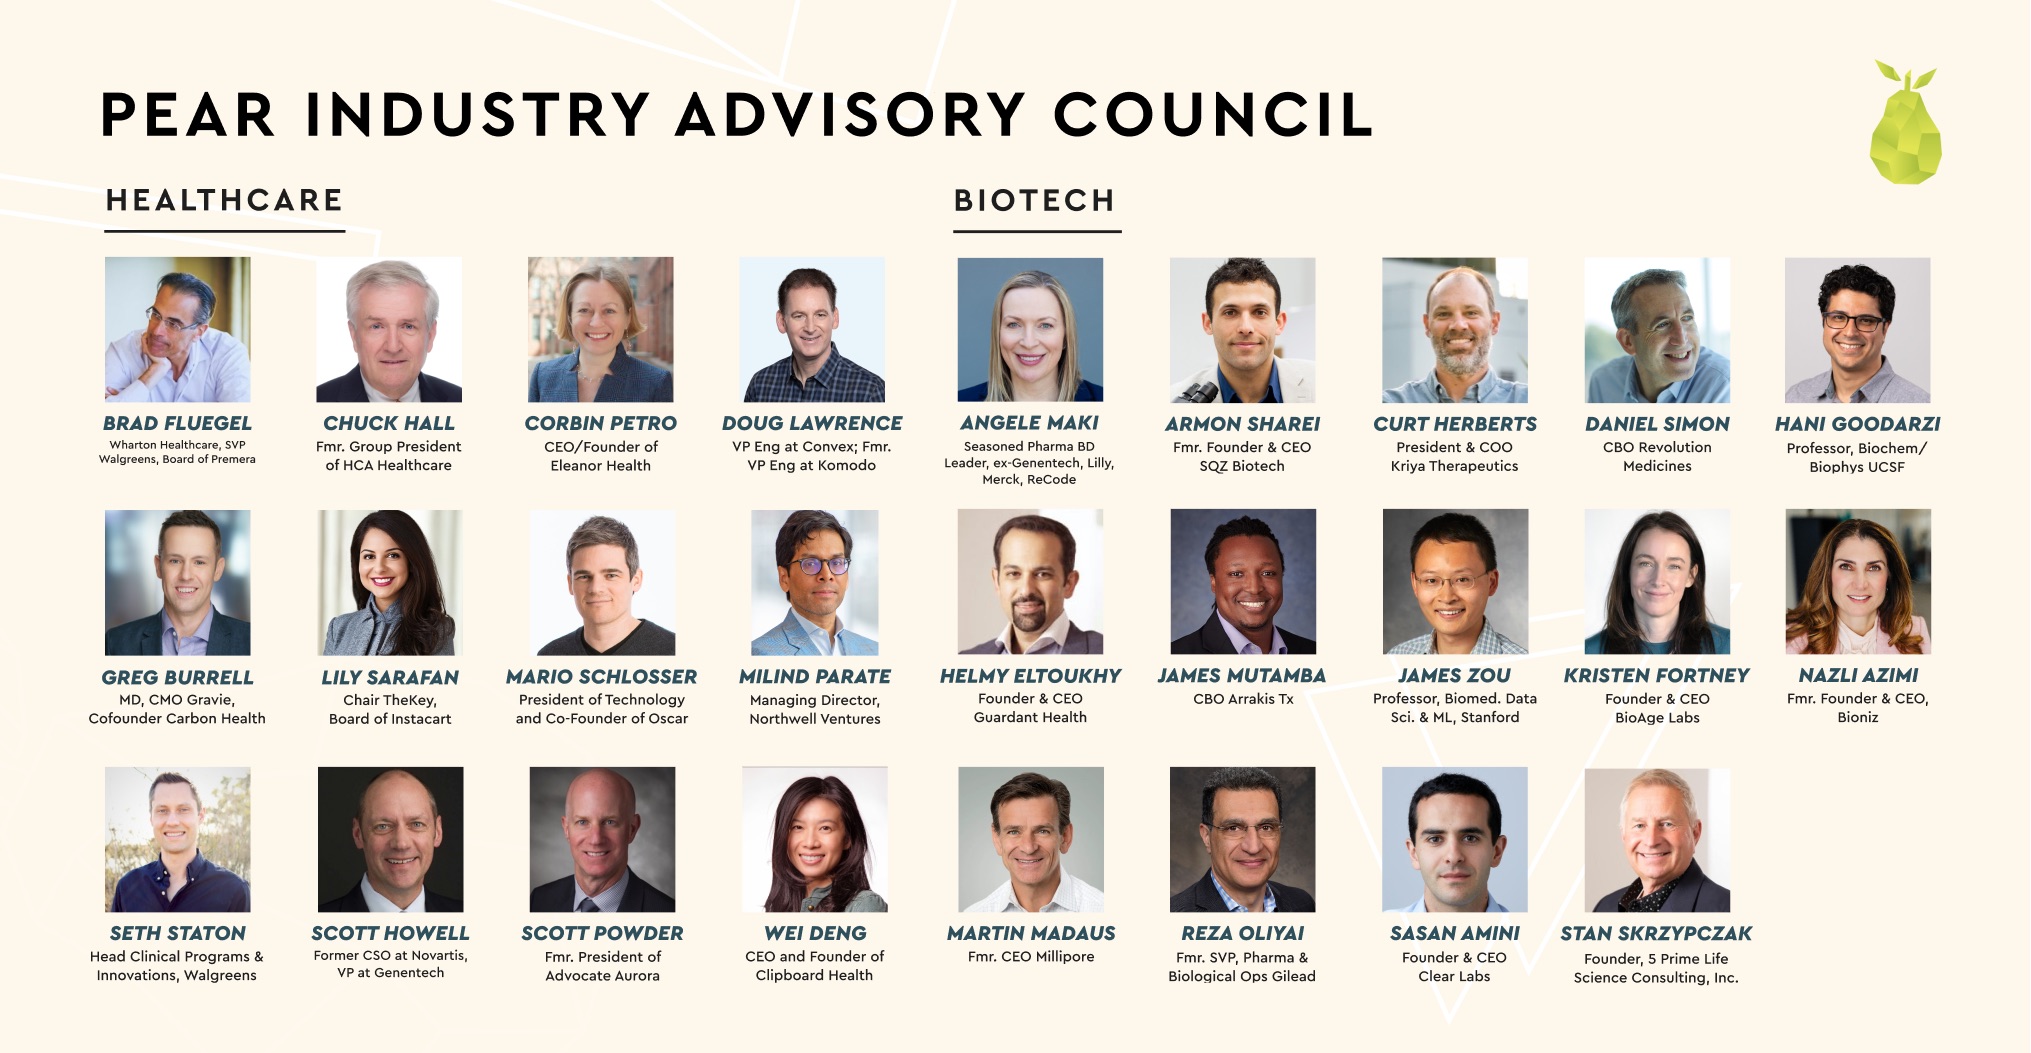 resources Introducing Pear’s Healthcare and Biotech Industry Advisory Councils!